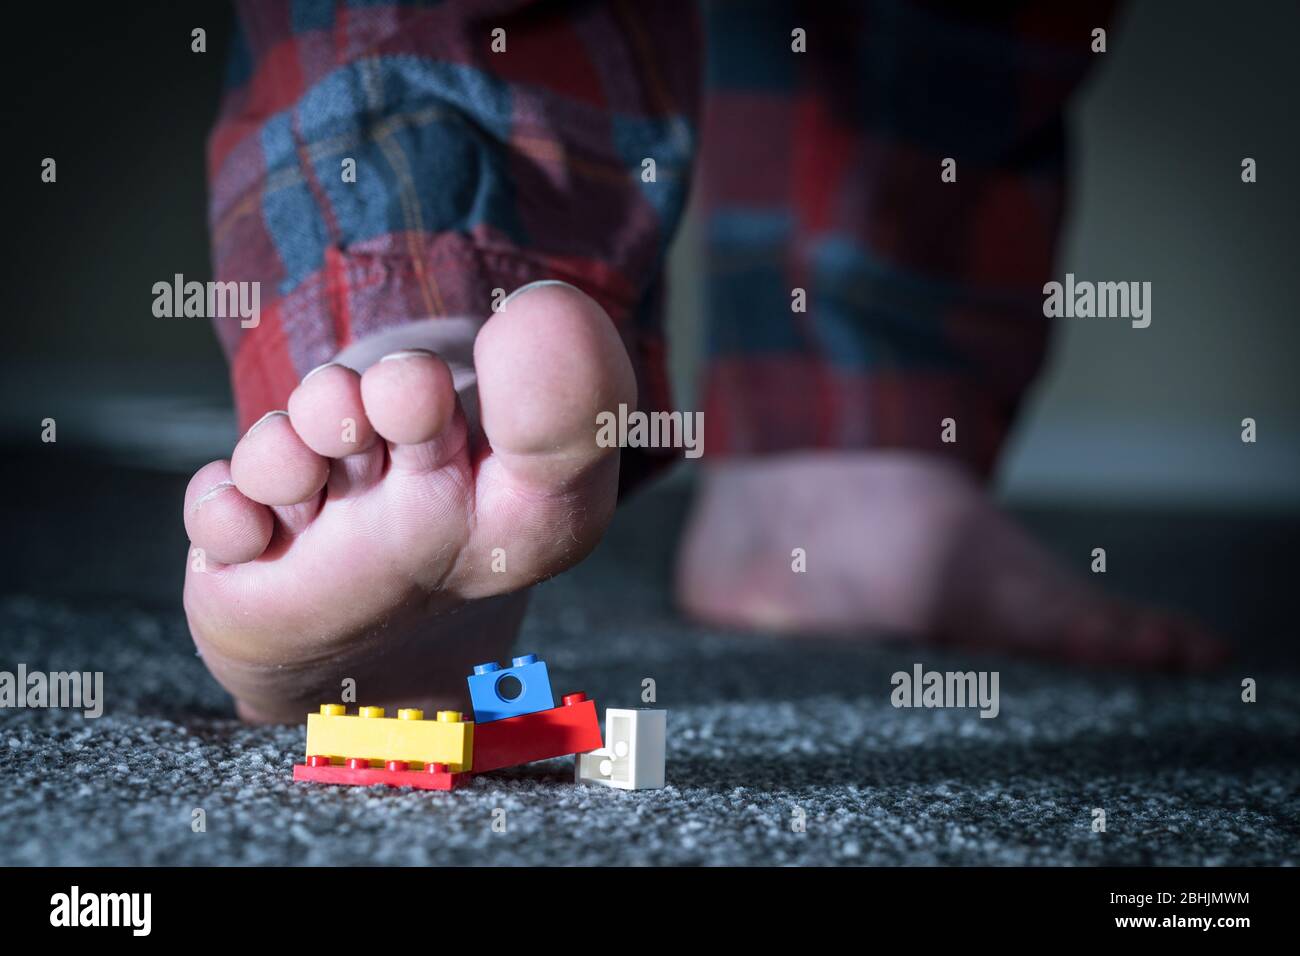 Man in his pajamas steping on Lego which was left on the floor overnight. Stock Photo